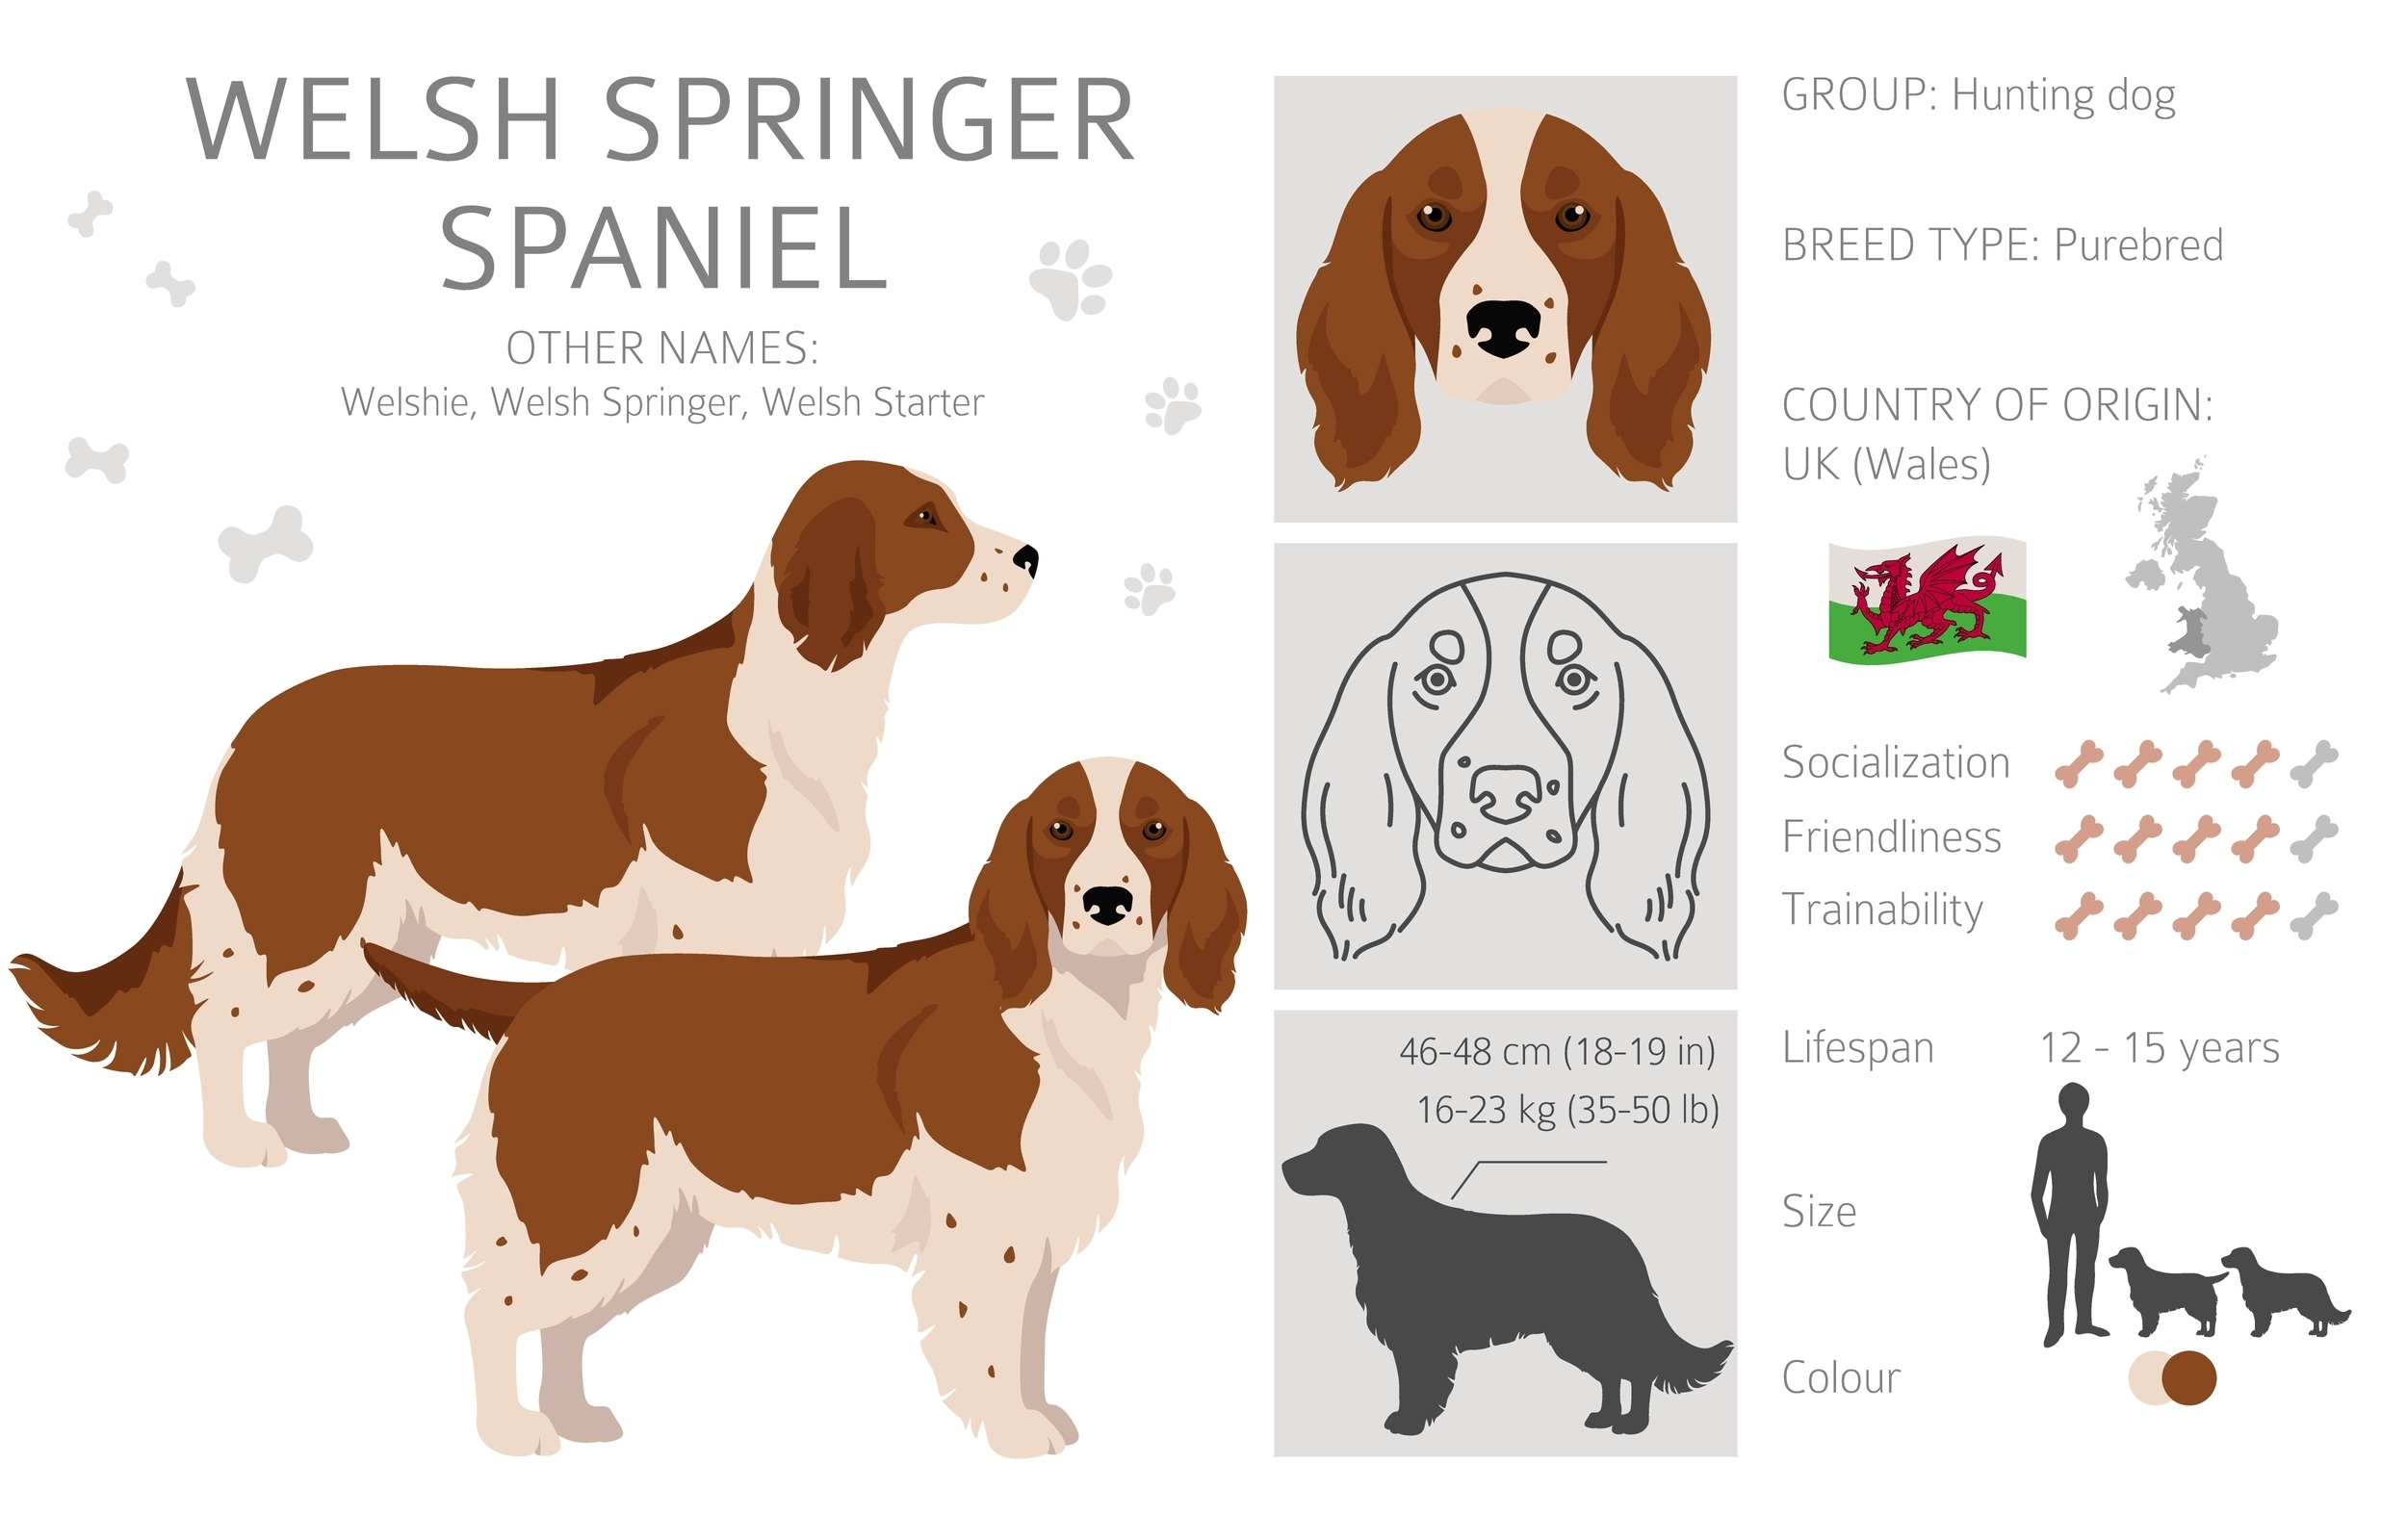 An infographic of the Welsh Springer Spaniel